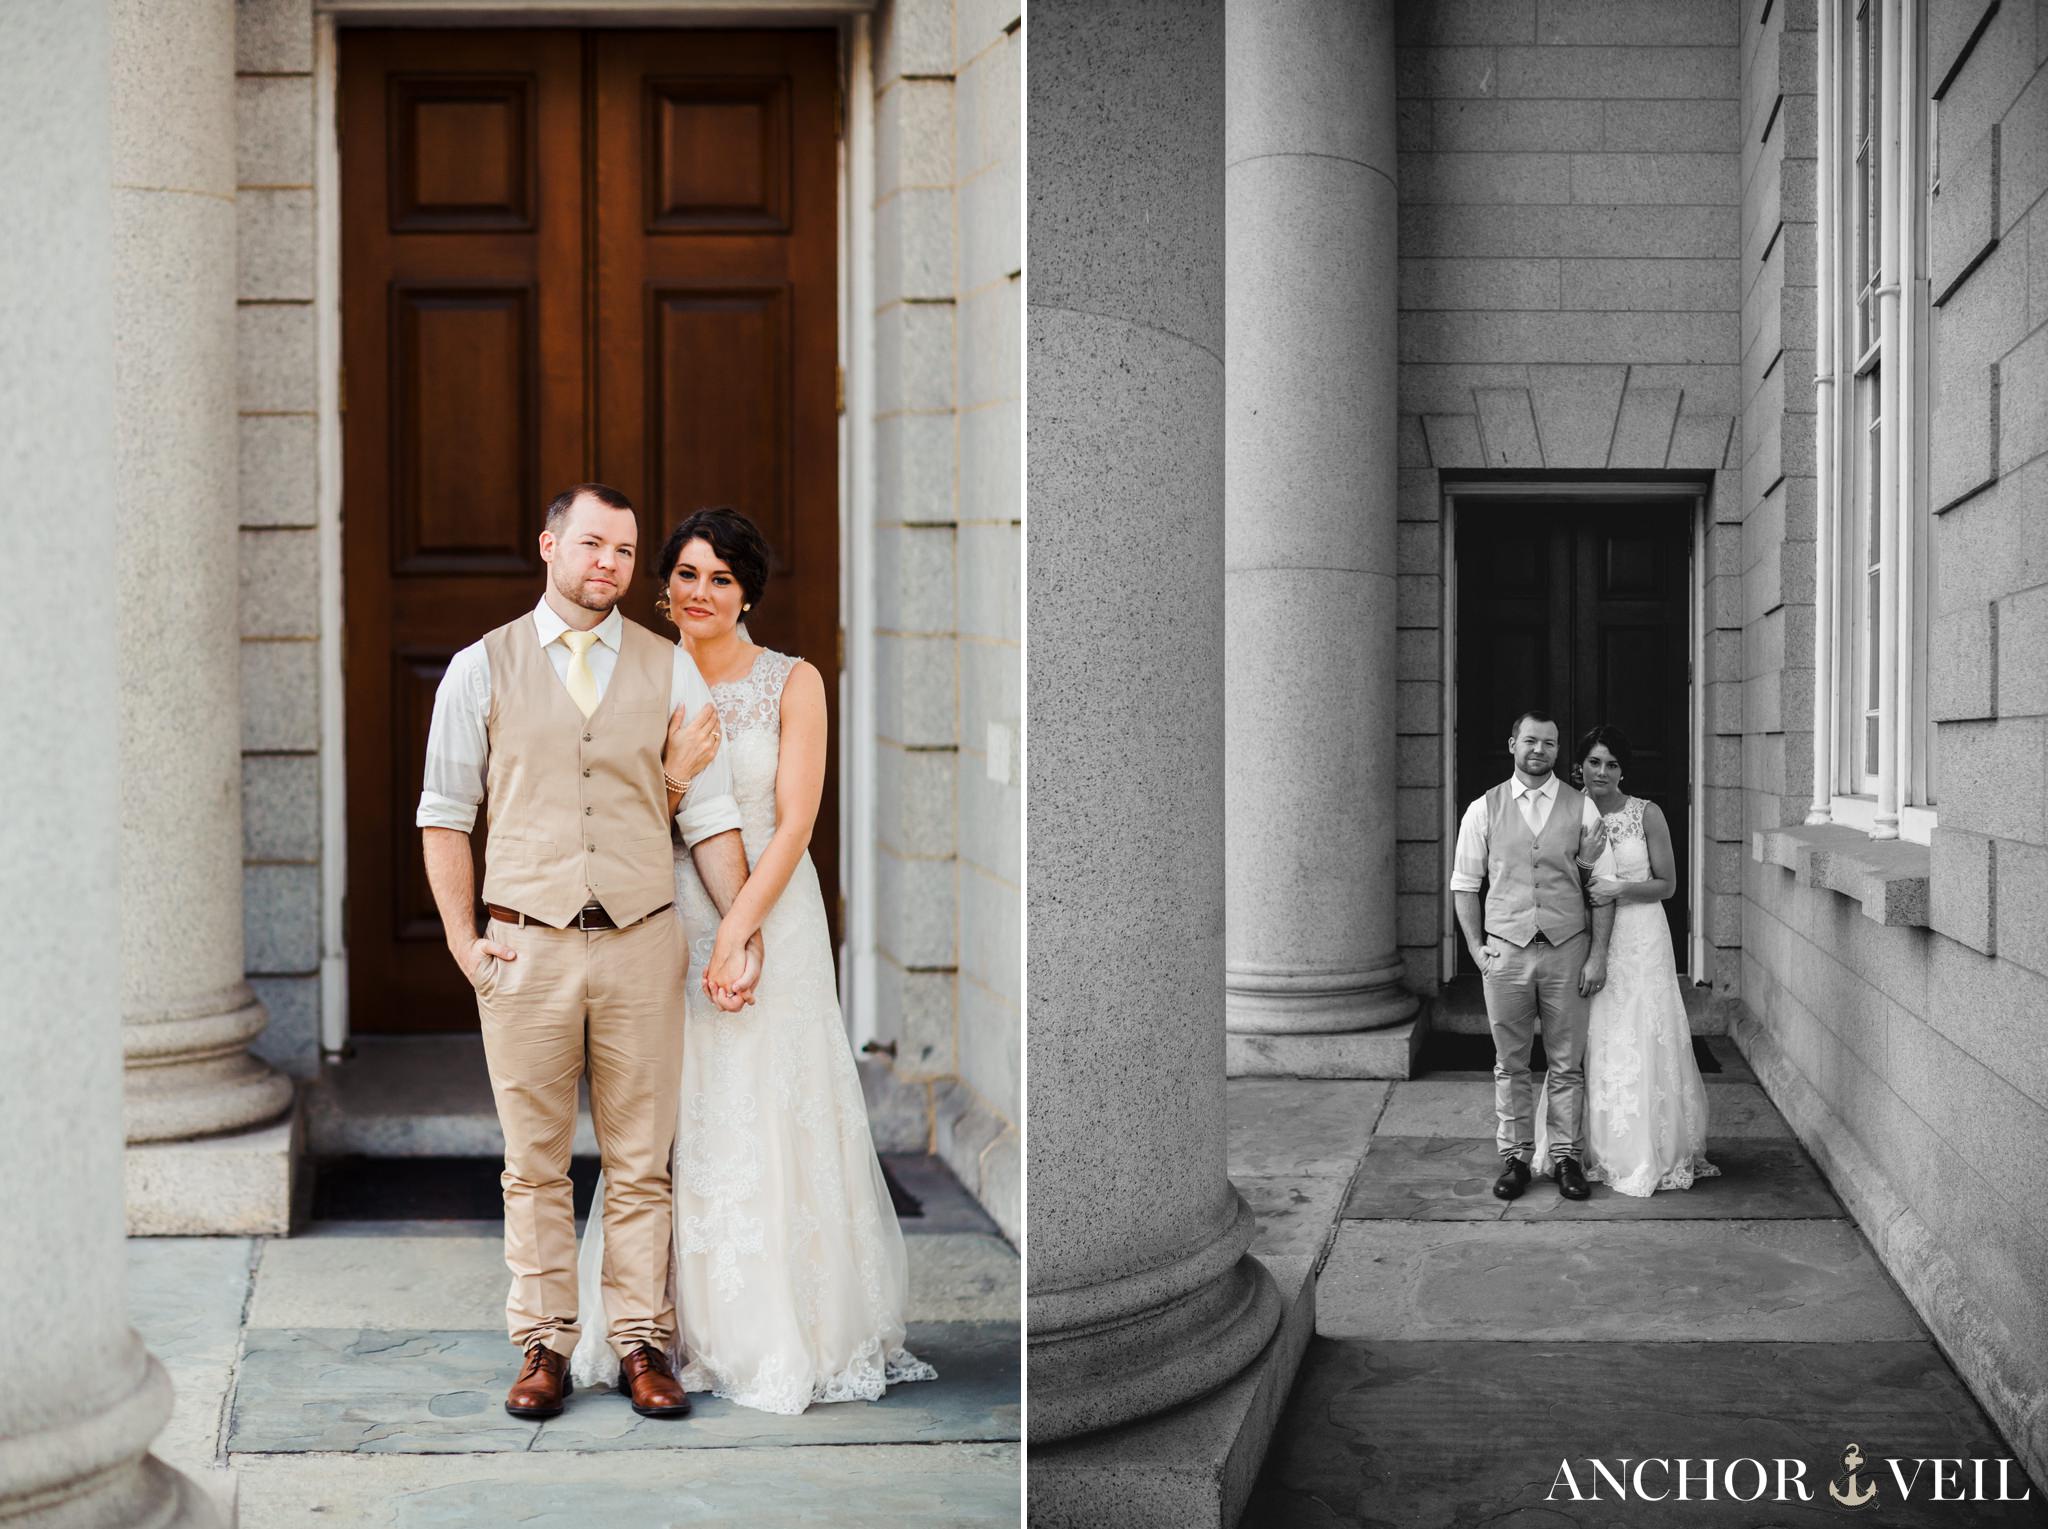 holding each other next to the pillars during their Forsyth Park Wedding Elopement